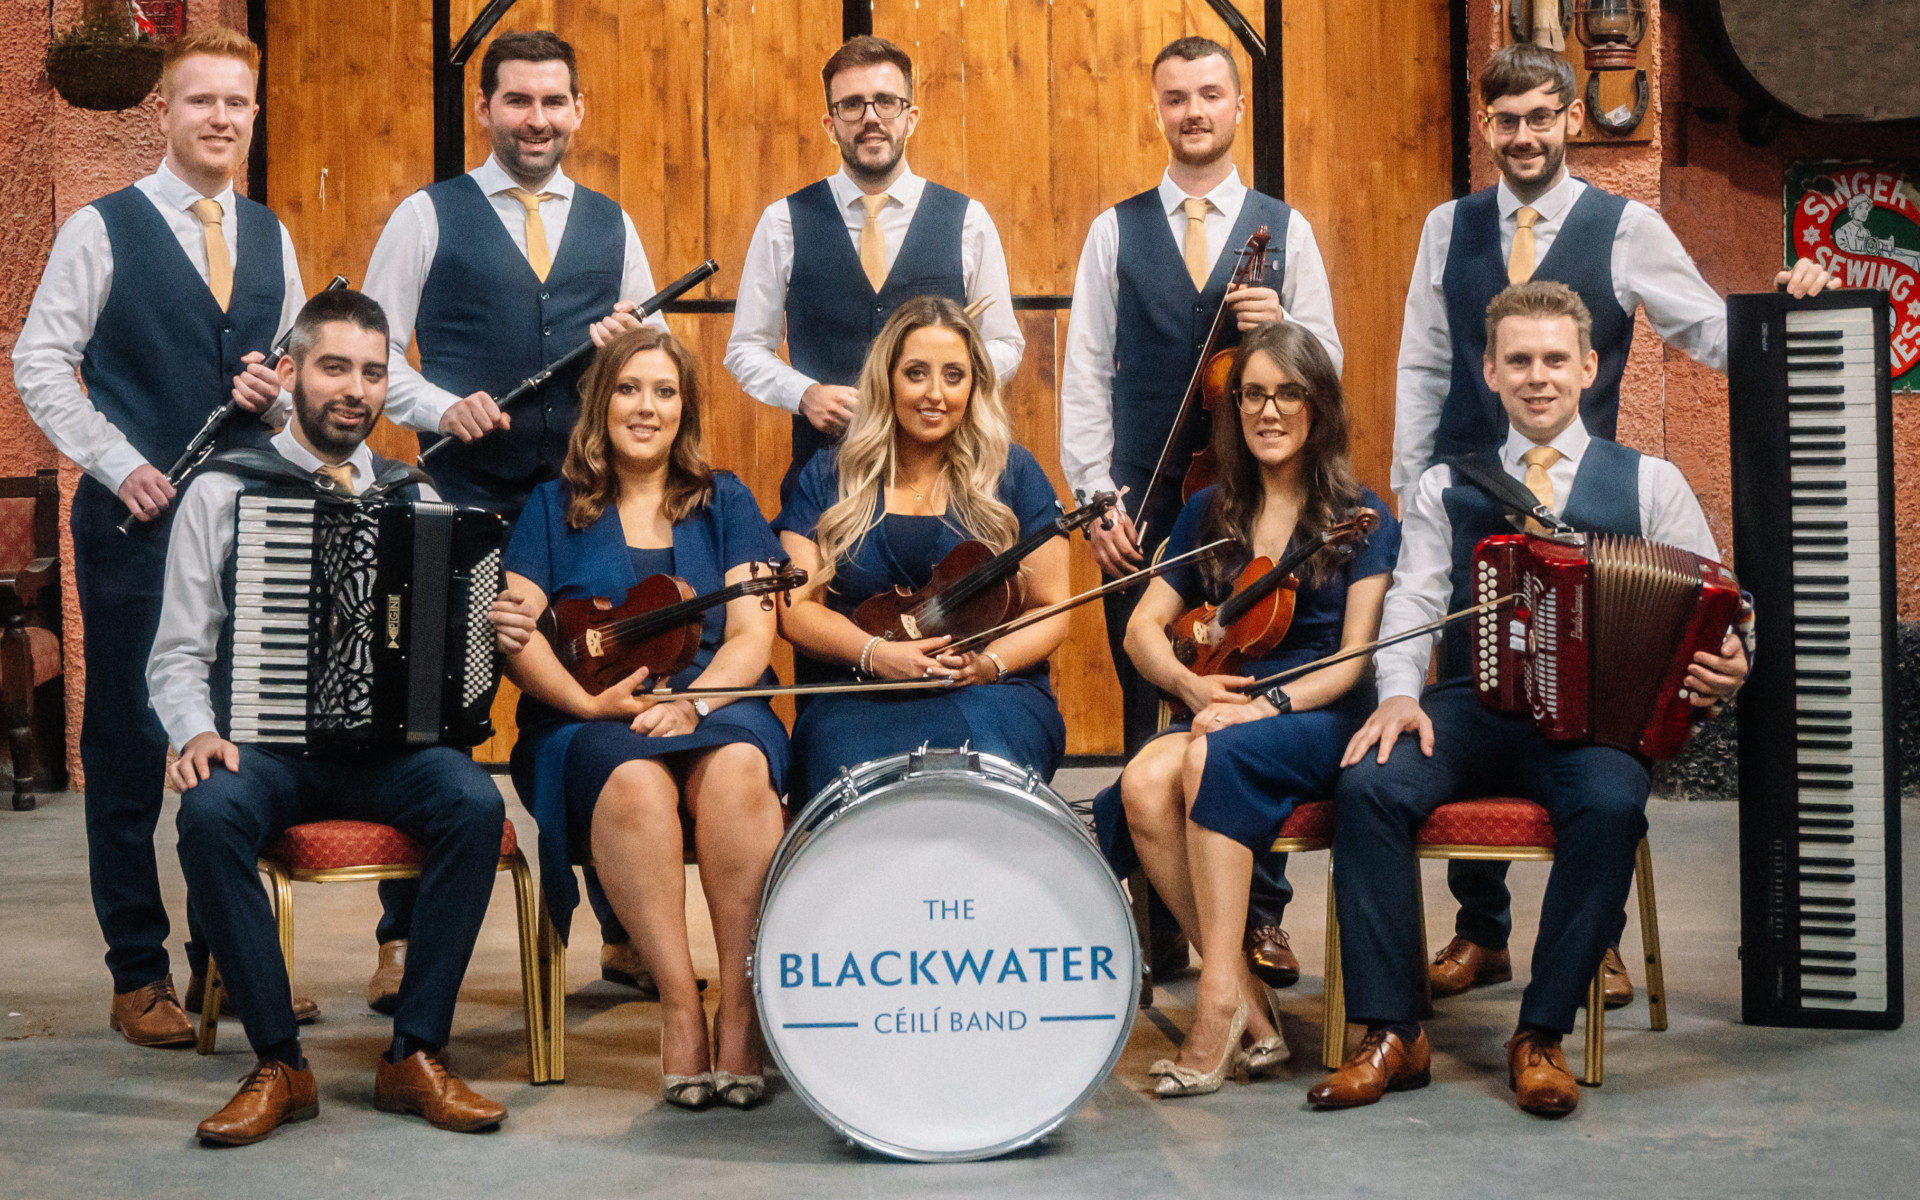 Award-winning céilí band to celebrate St Patrick’s Day in Carrickmore